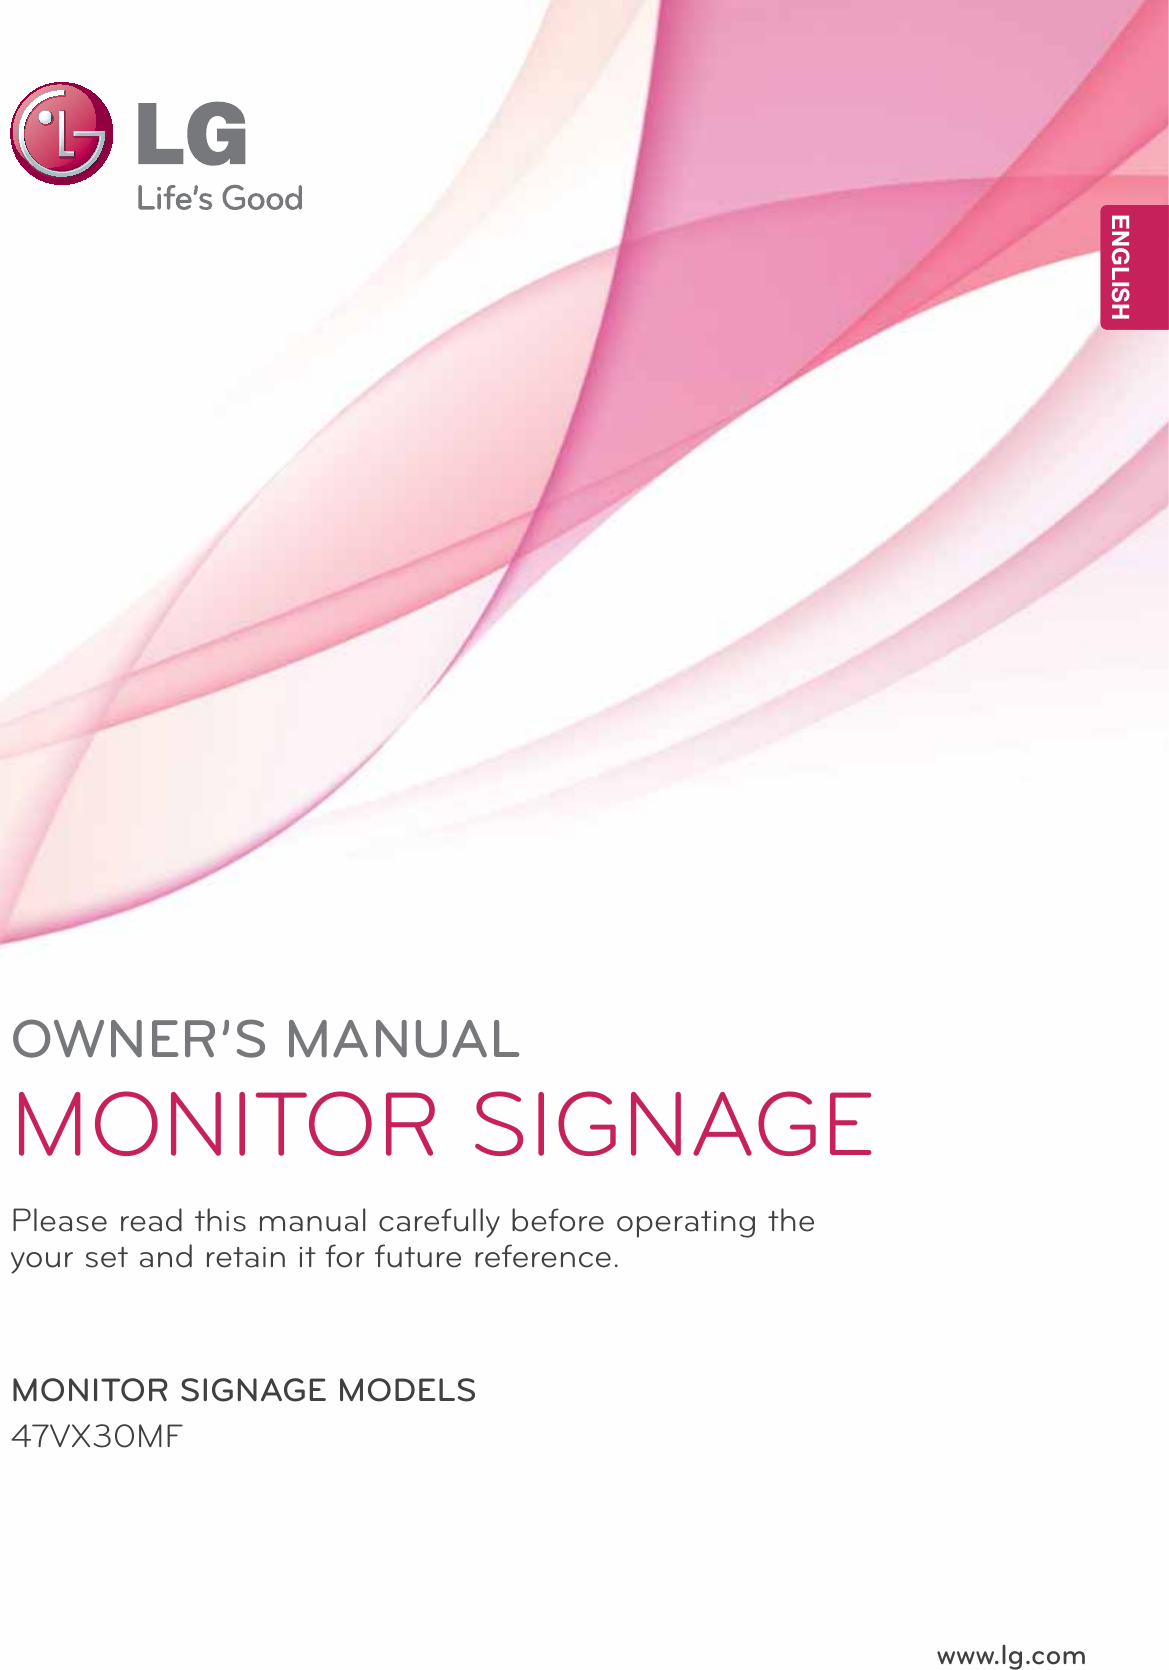 www.lg.comOWNER’S MANUALMONITOR SIGNAGE 47VX30MFPlease read this manual carefully before operating the your set and retain it for future reference.MONITOR SIGNAGE MODELSENGENGLISH